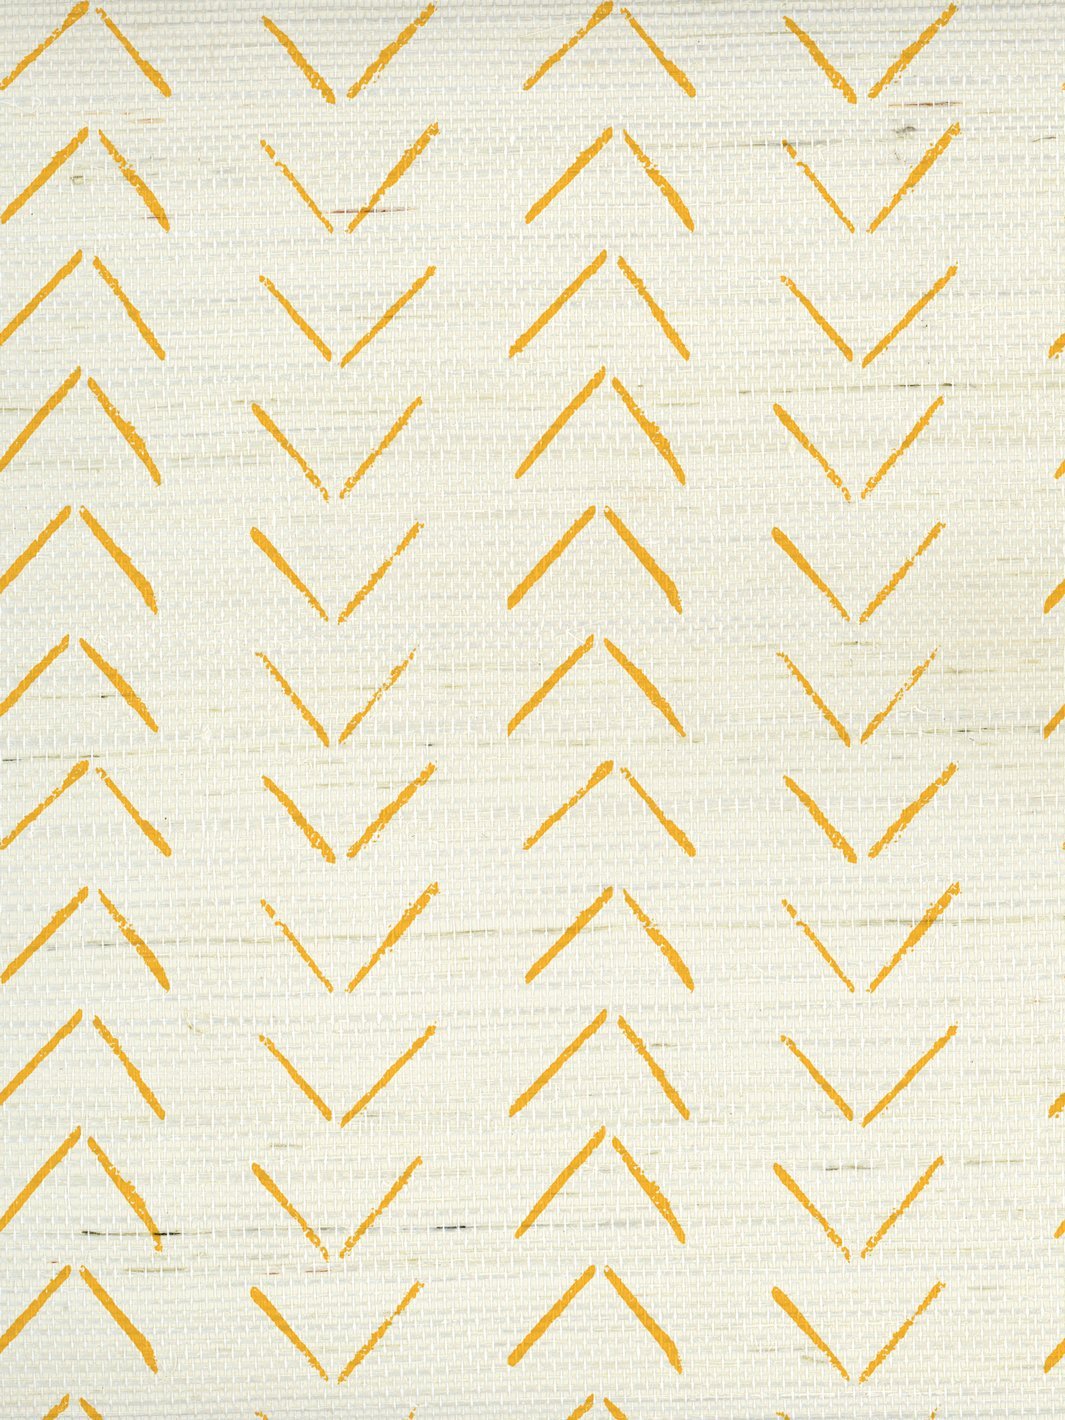 'Arrows' Grasscloth' Wallpaper by Nathan Turner - Gold